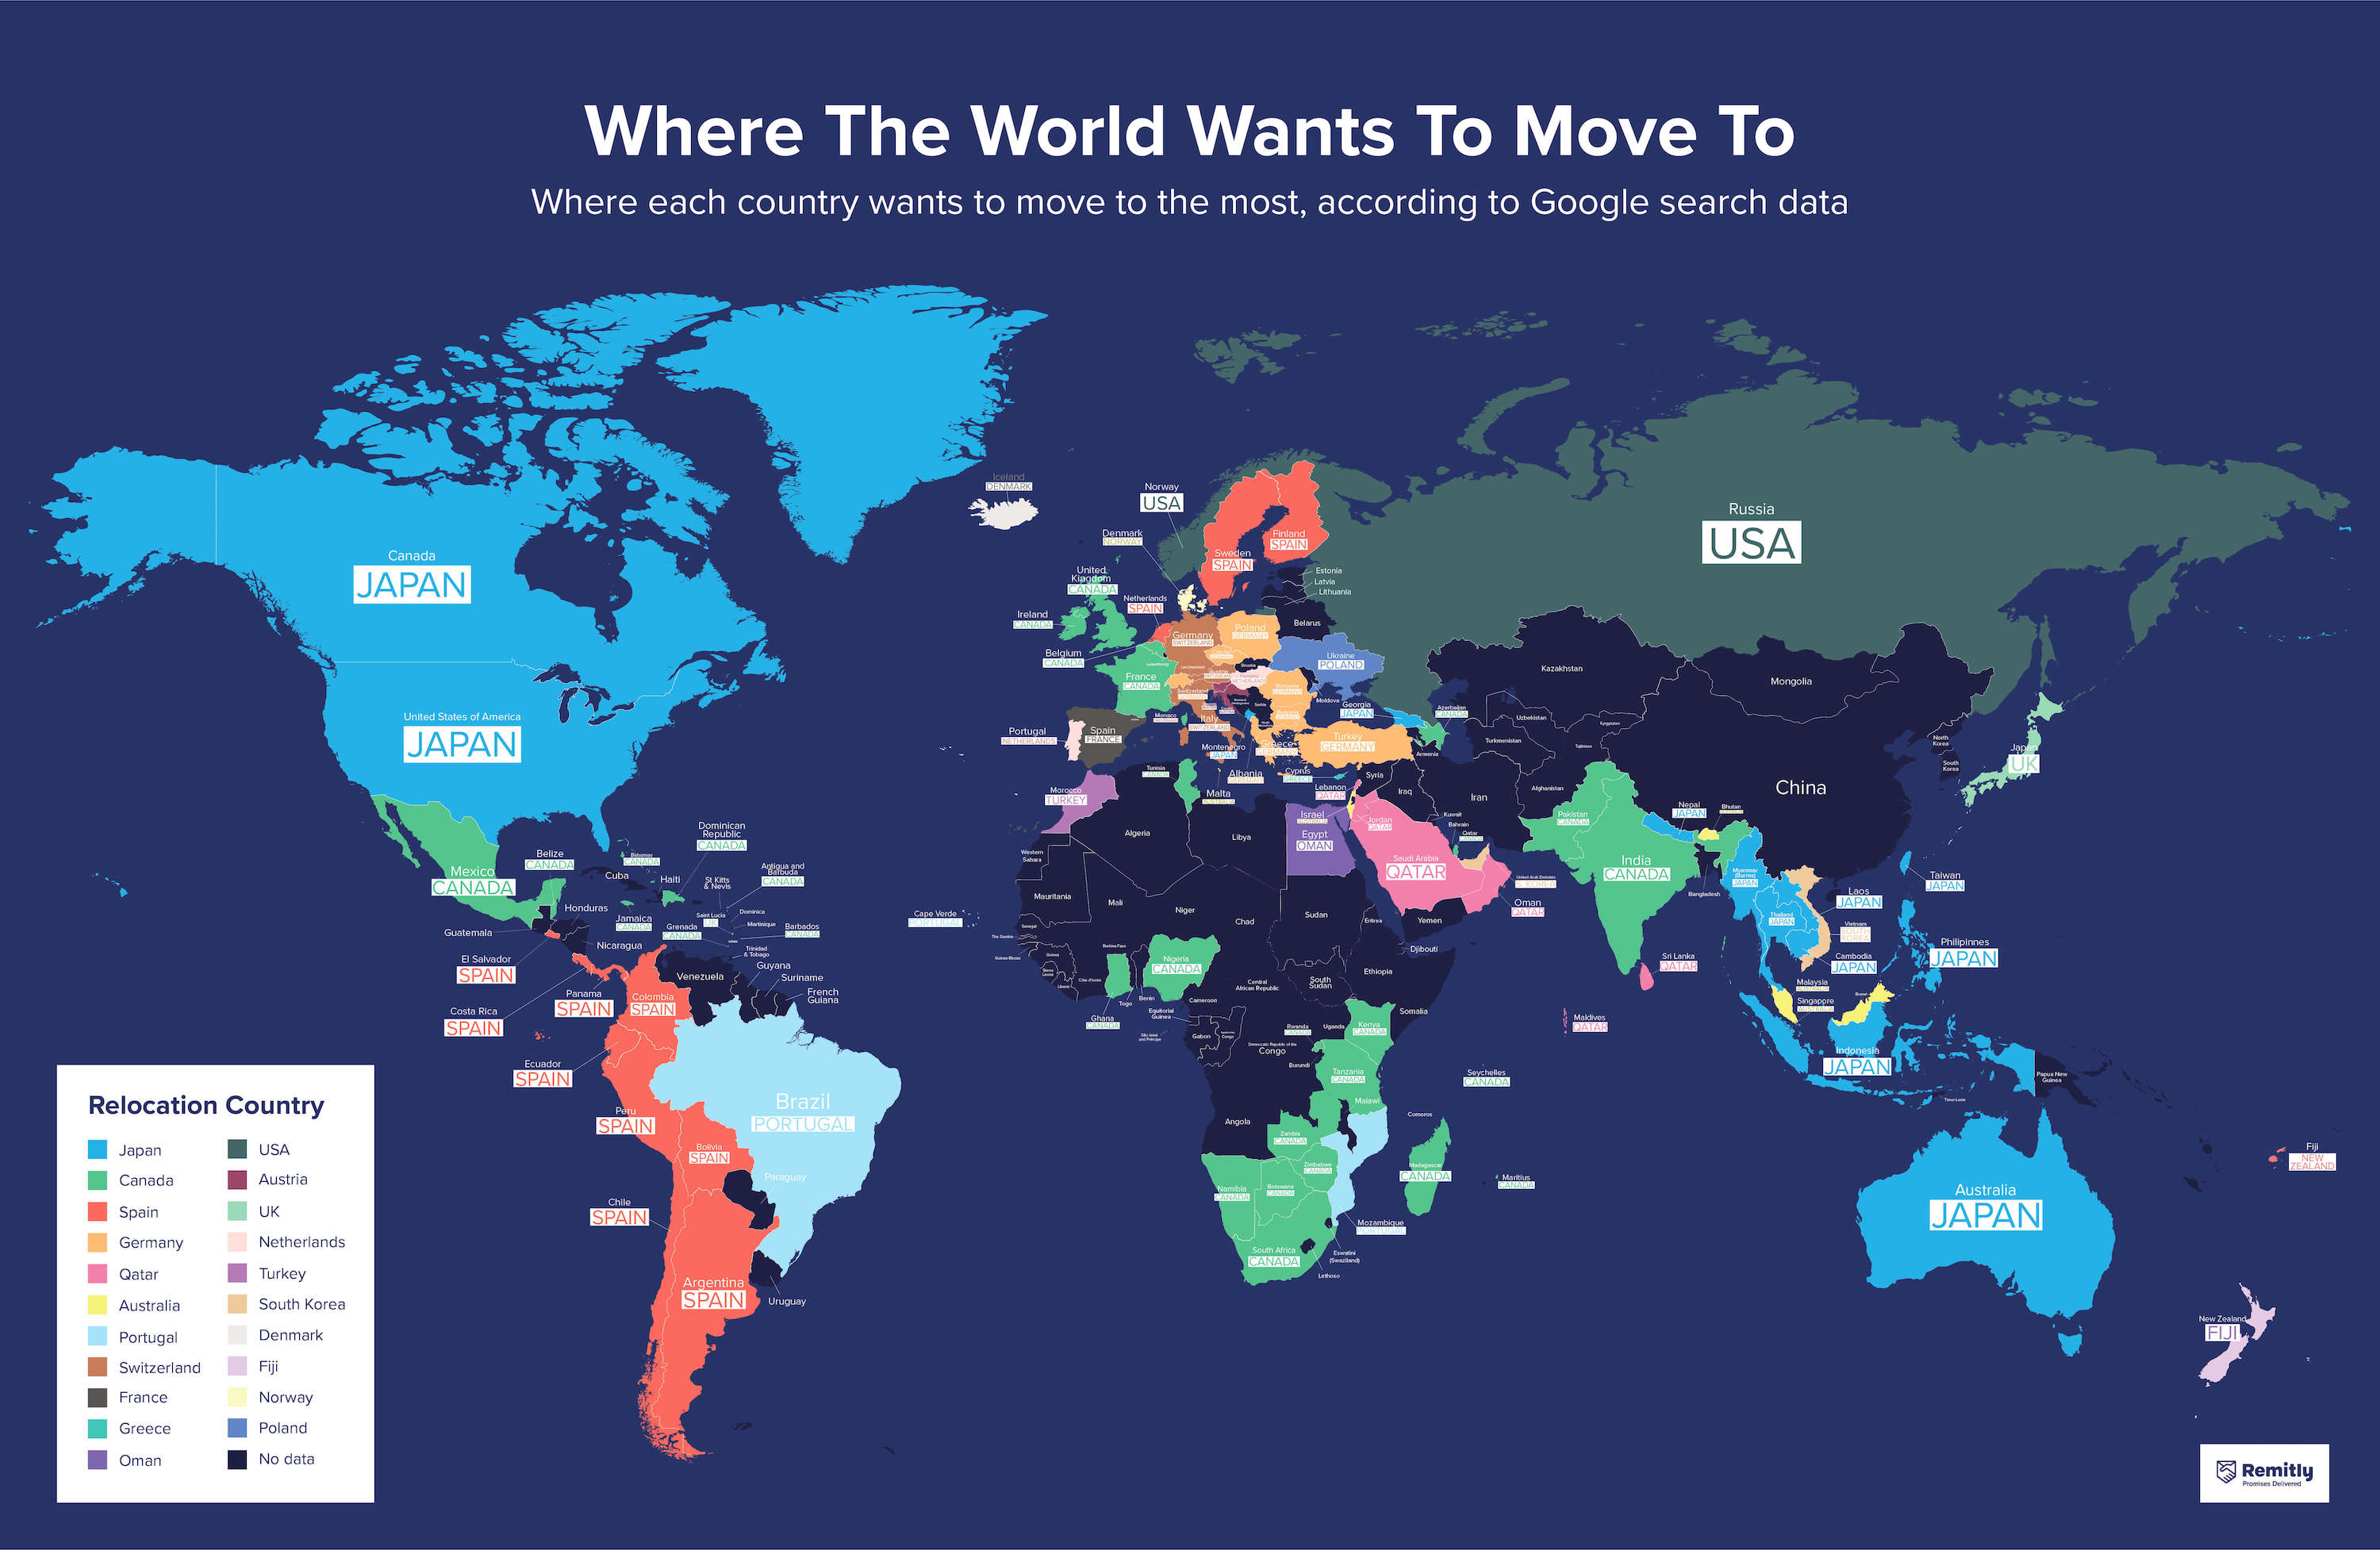 Where the world wants to move to